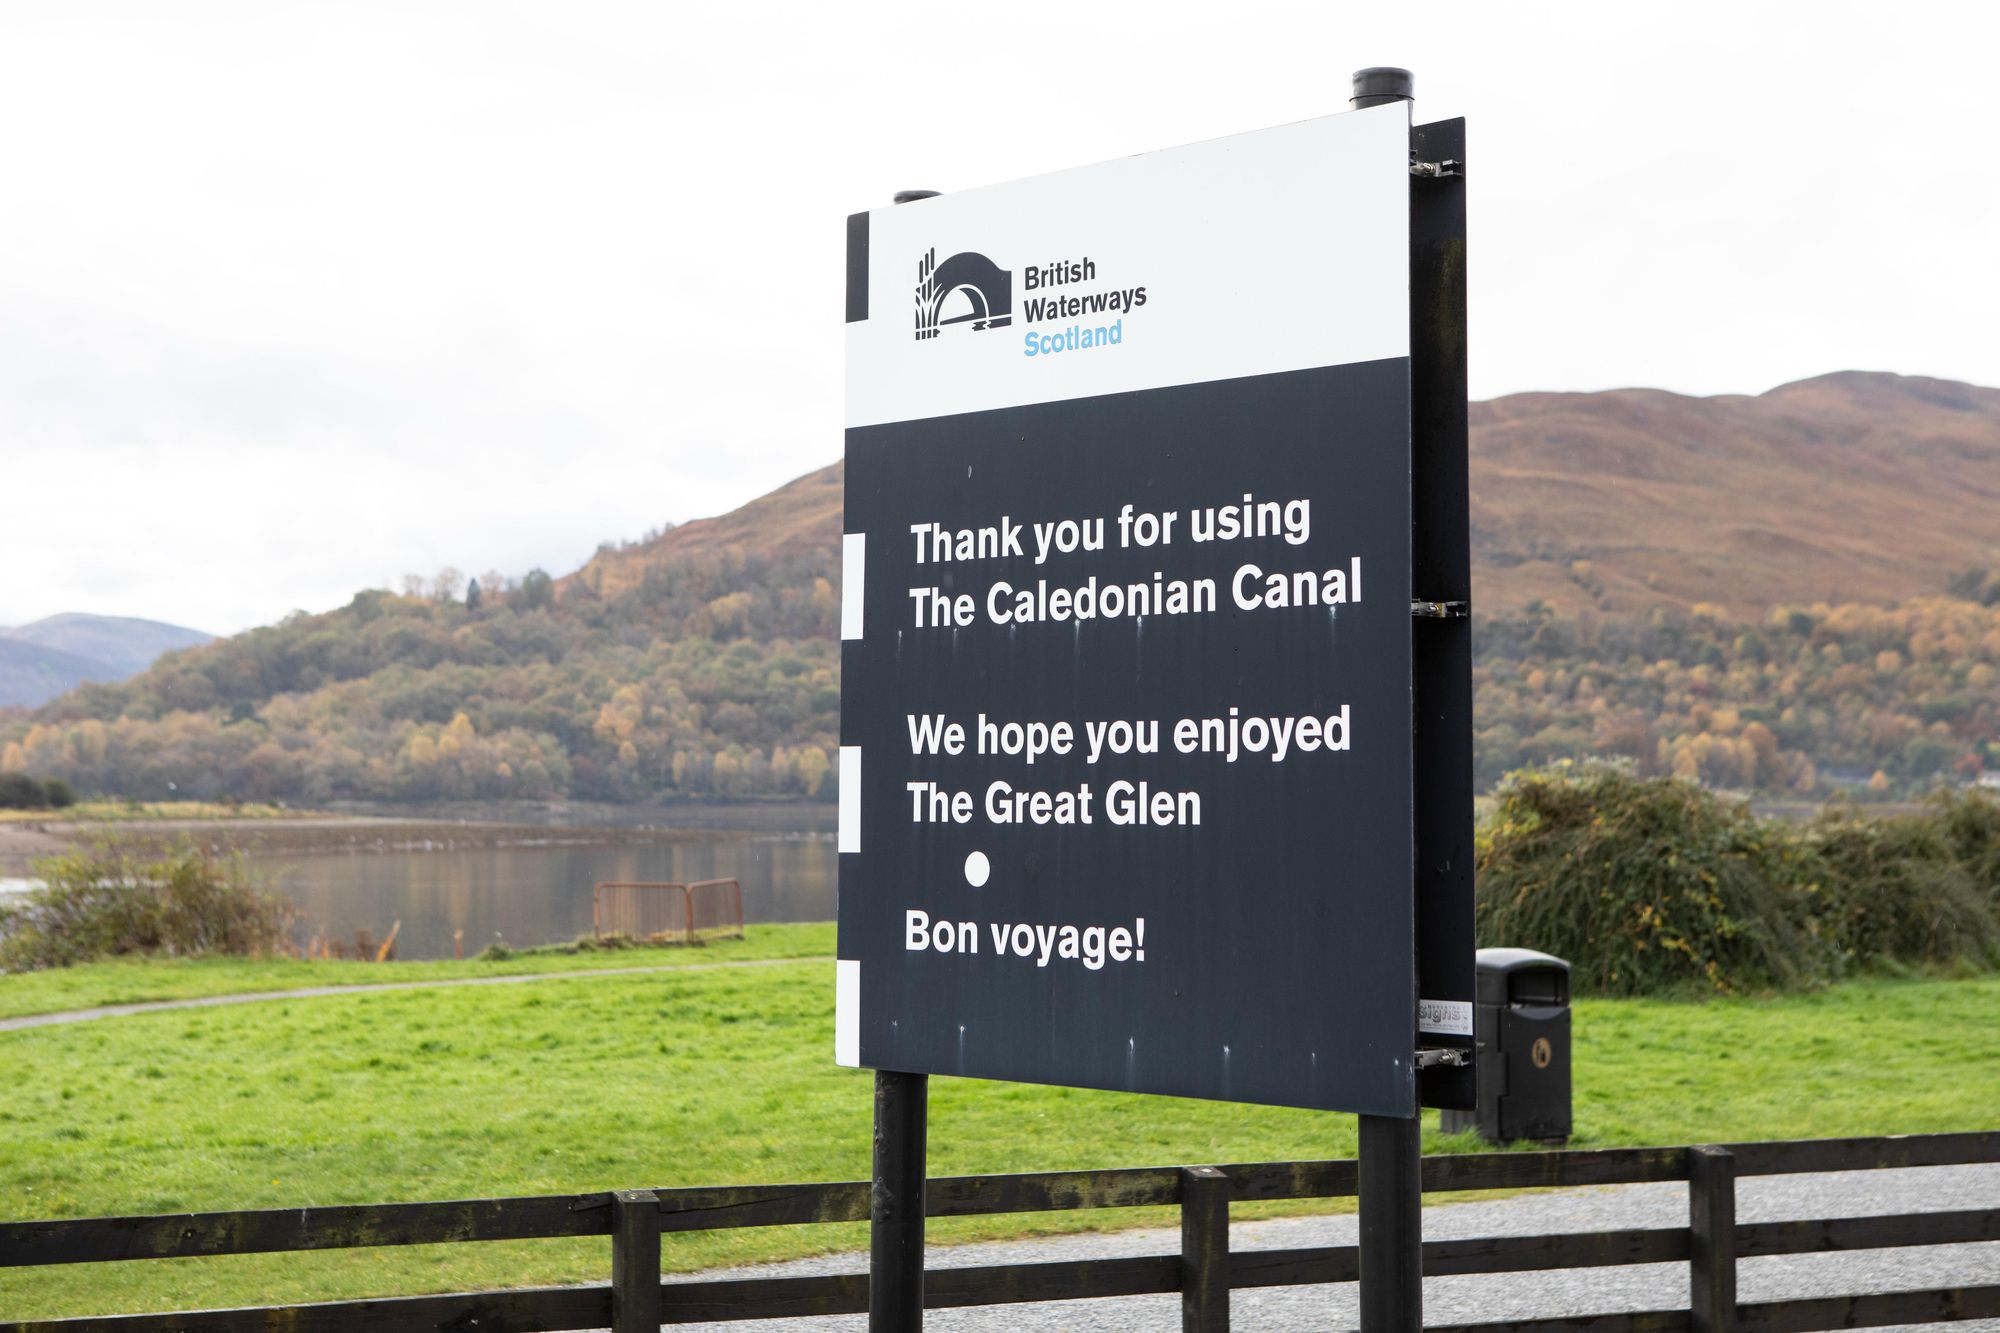 The Caledonian Canal has become a popular hiking, cycling and canoe trail, known as the Great Glen Way. Photo: Getty